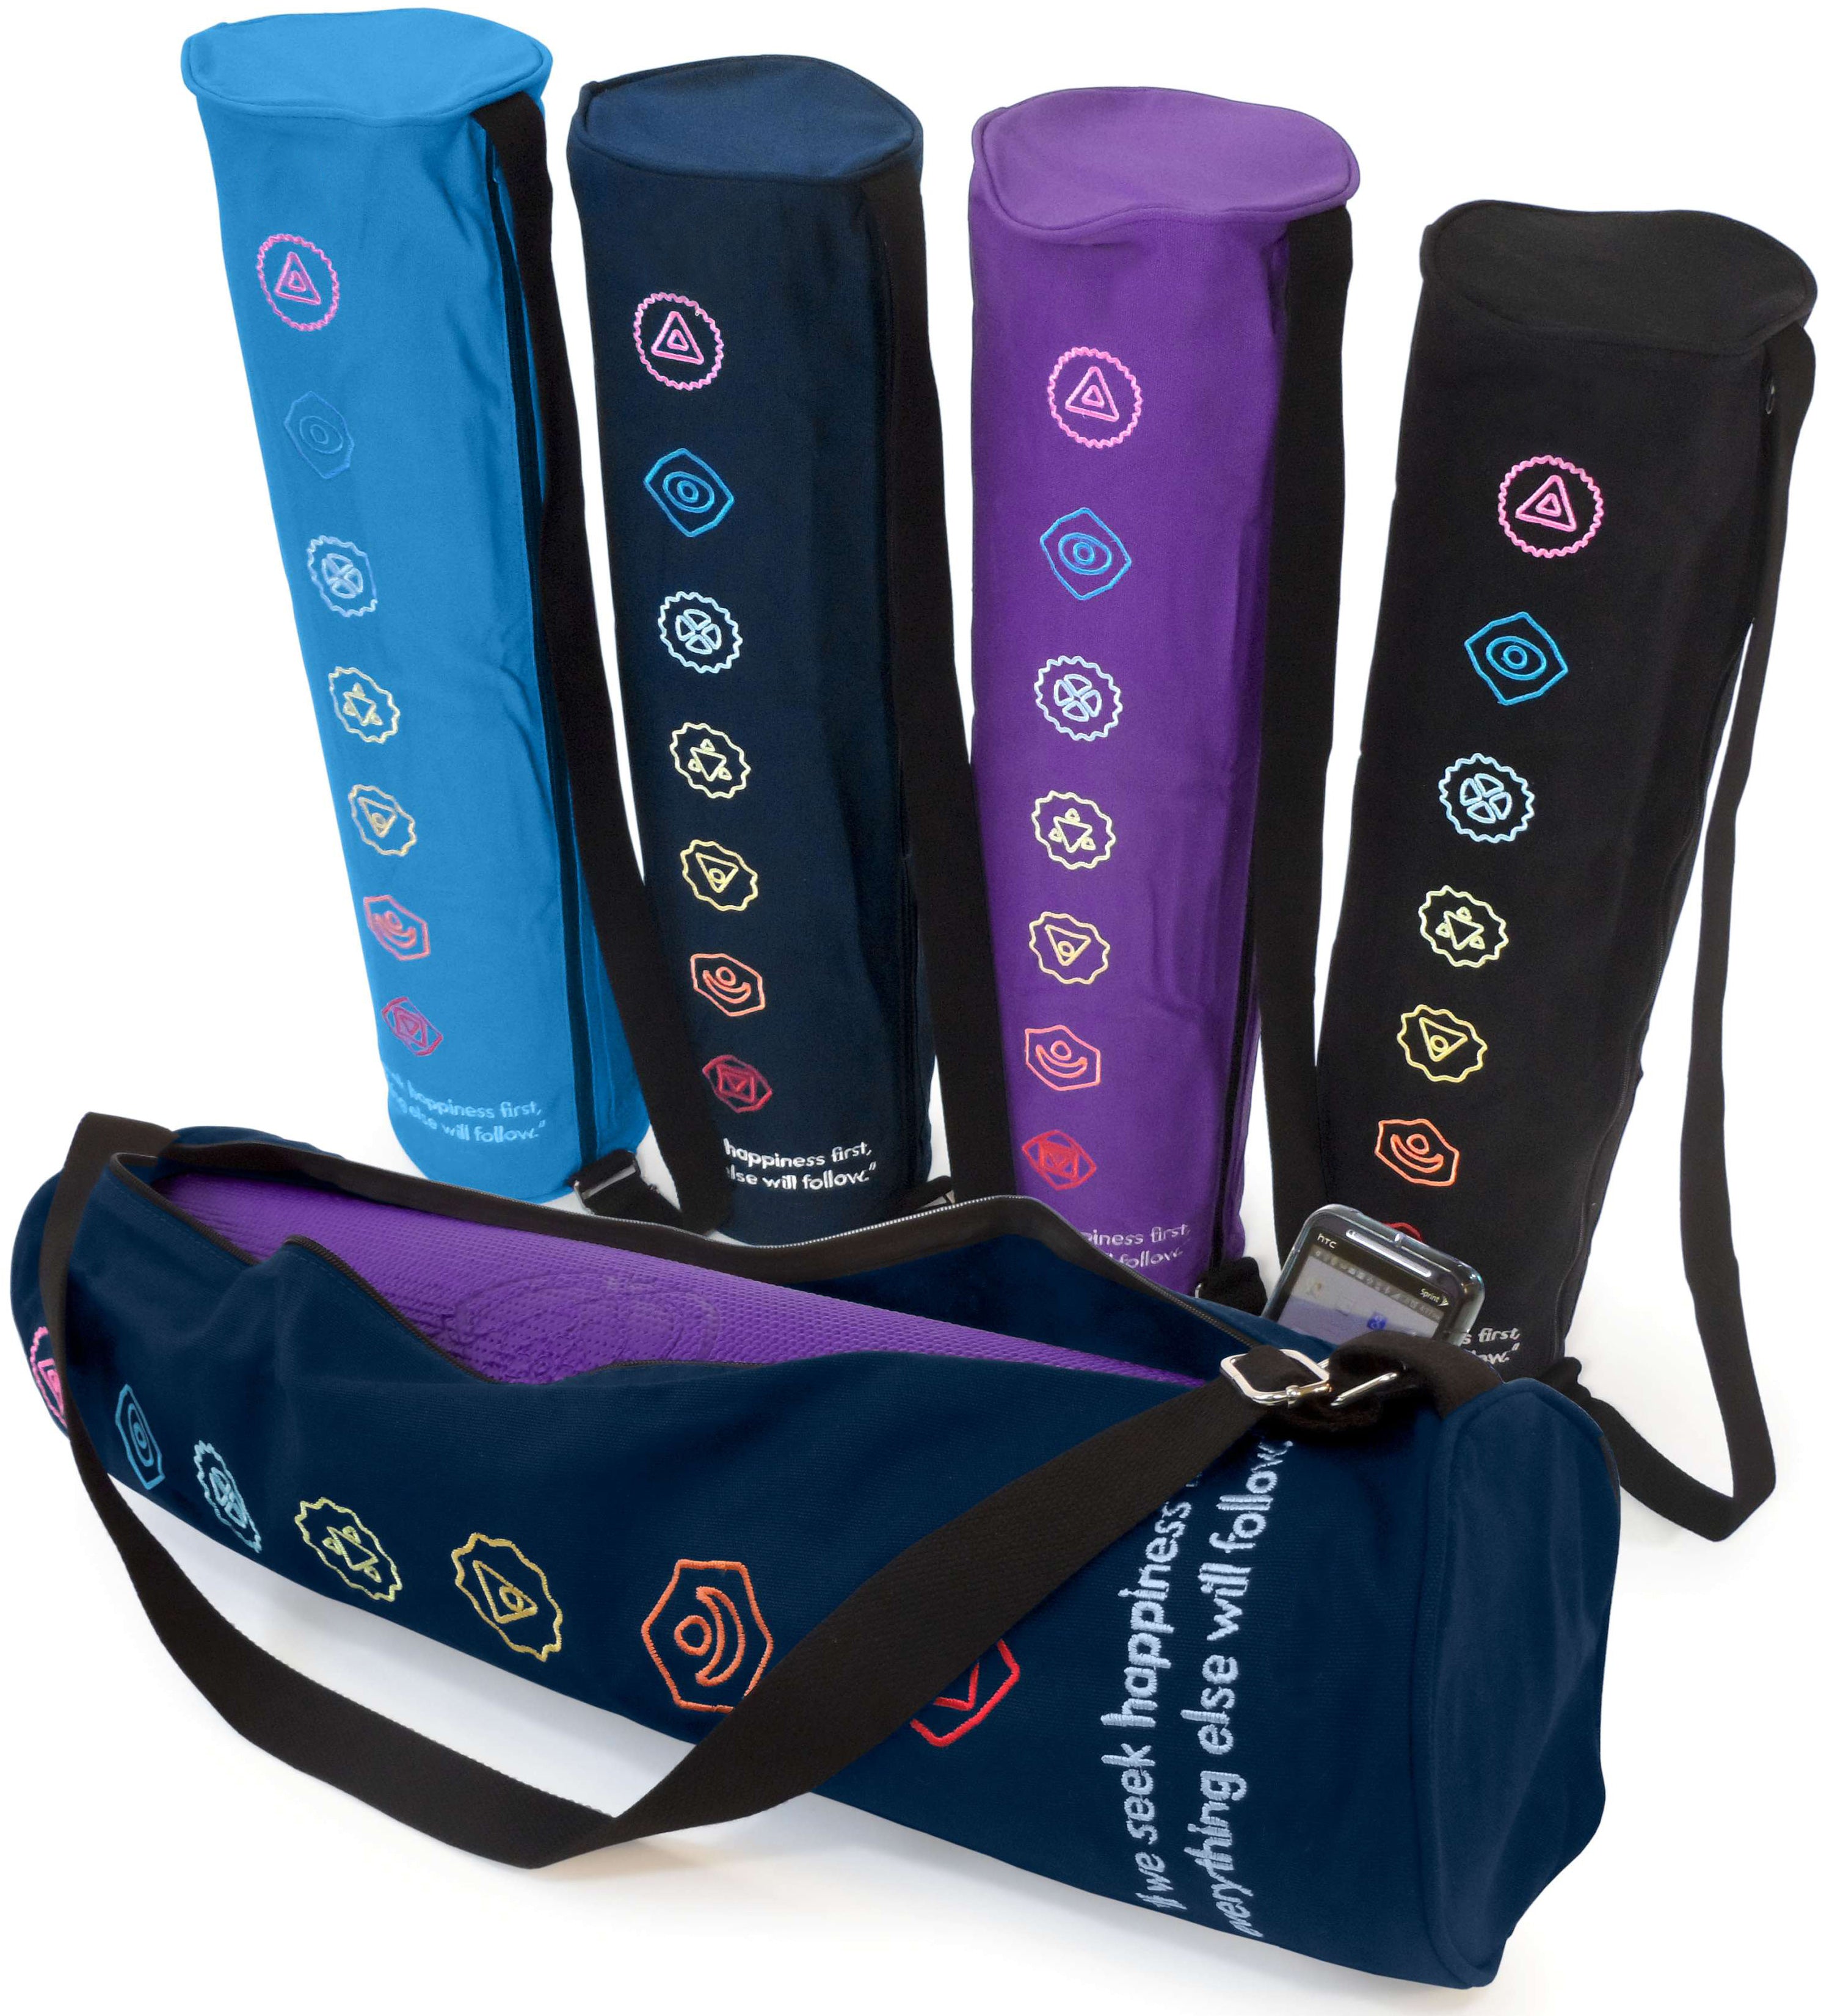 New Indian Multi Embroidered Yoga Mat Carrier Bag With